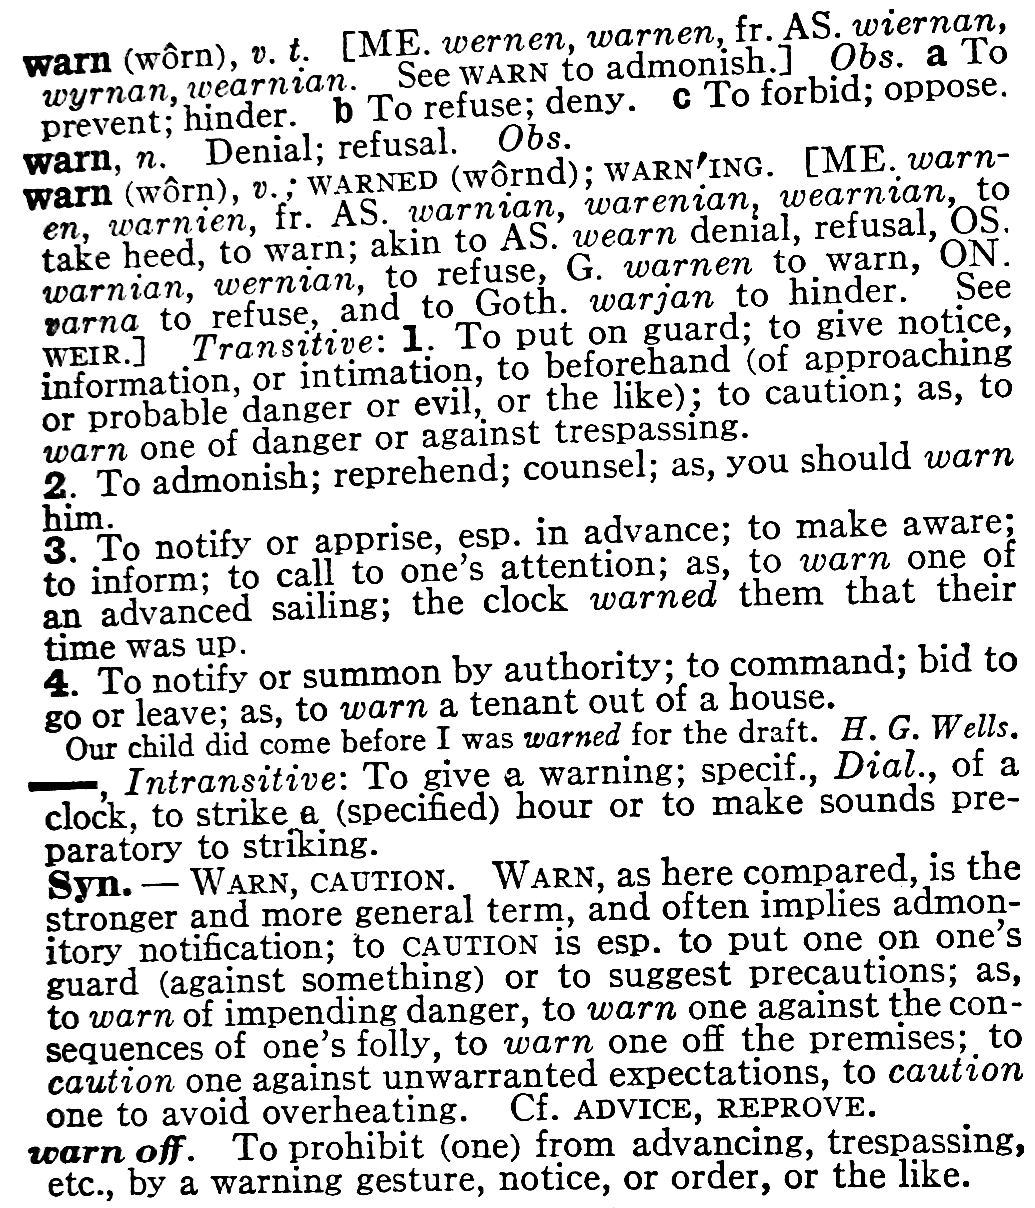 Noah Webster, New international Dictionary of the English Language (G. & C. Merriam Company, 1955)